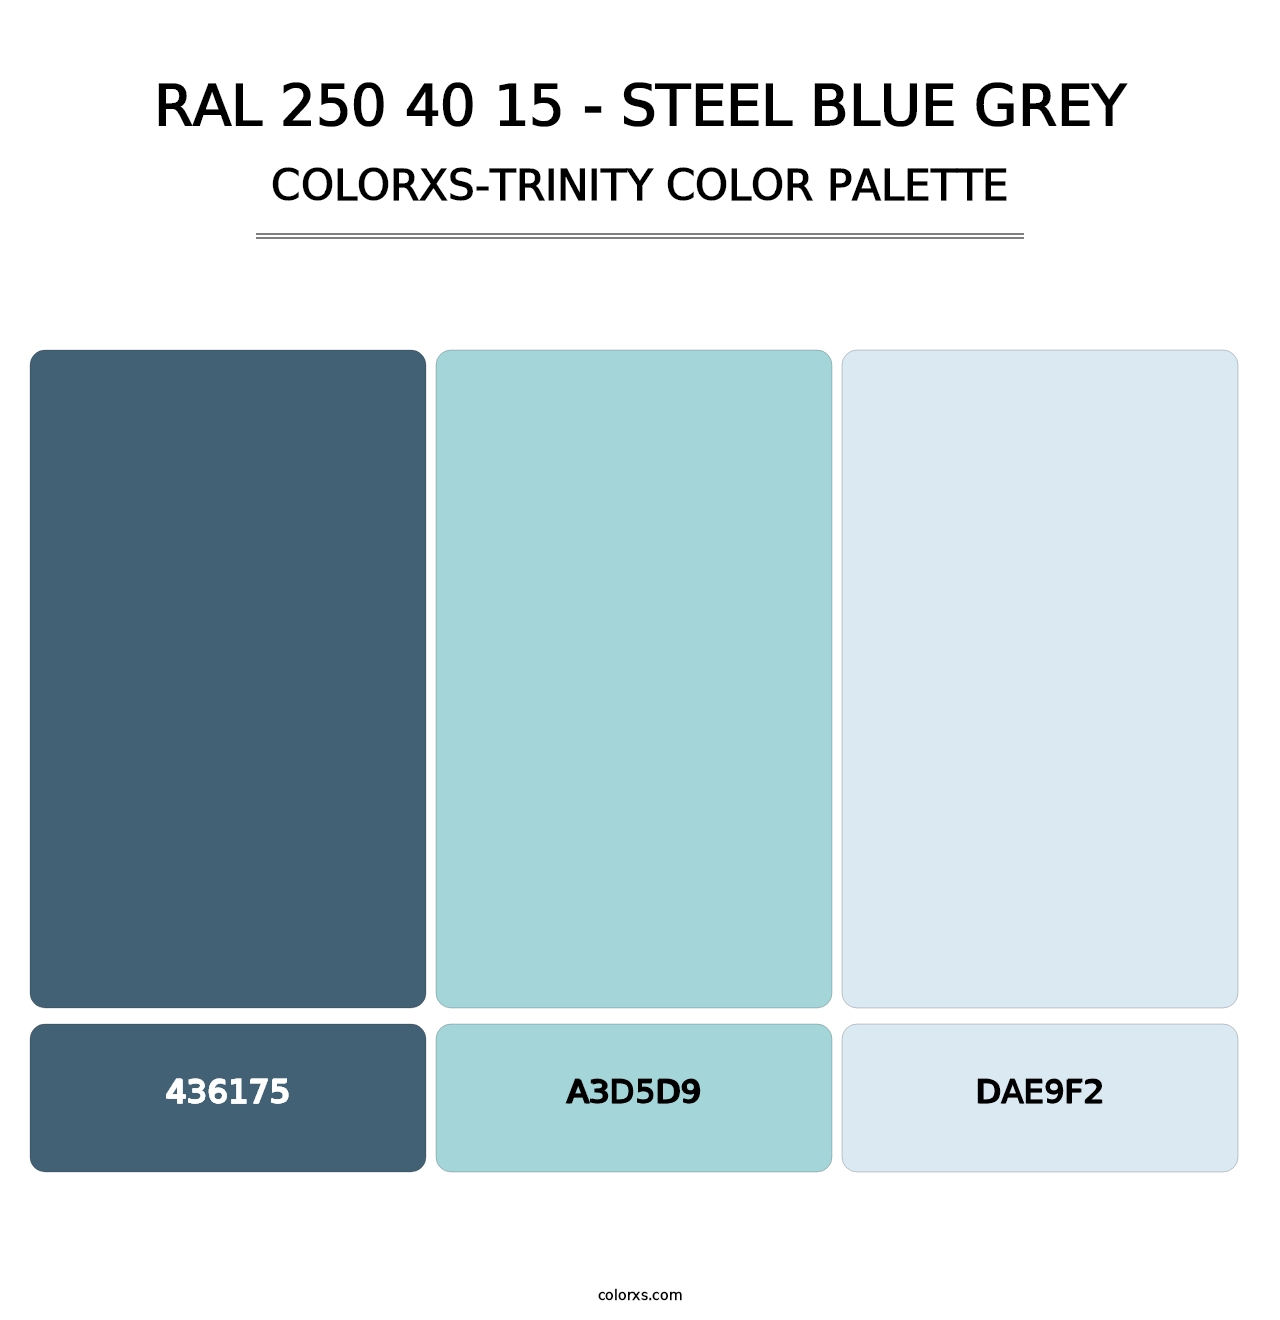 RAL 250 40 15 - Steel Blue Grey - Colorxs Trinity Palette